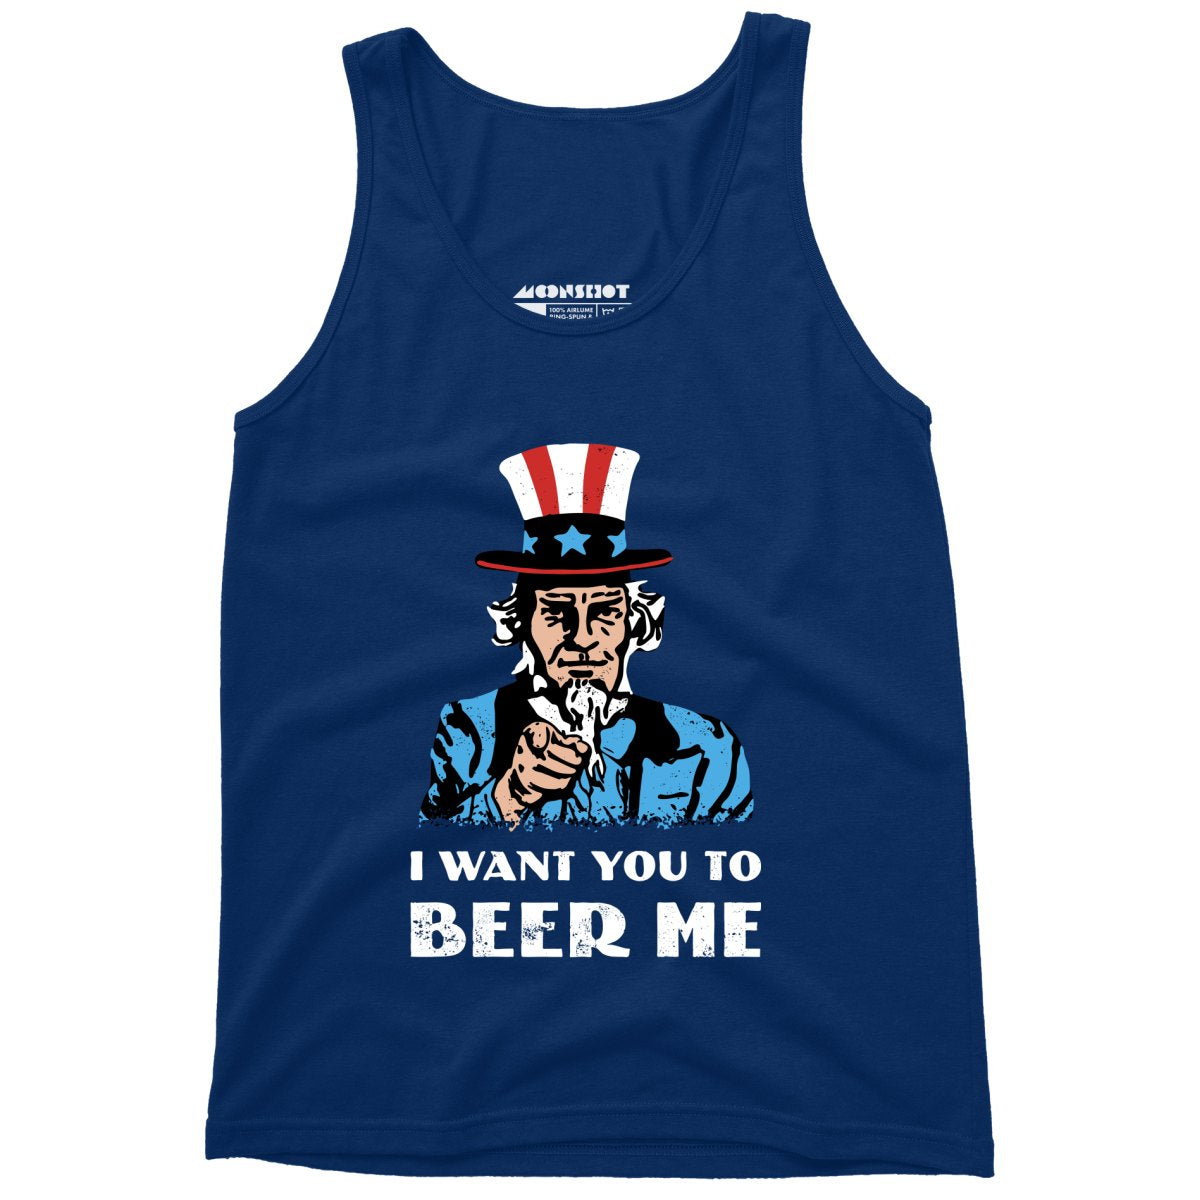 I Want You To Beer Me - Unisex Tank Top